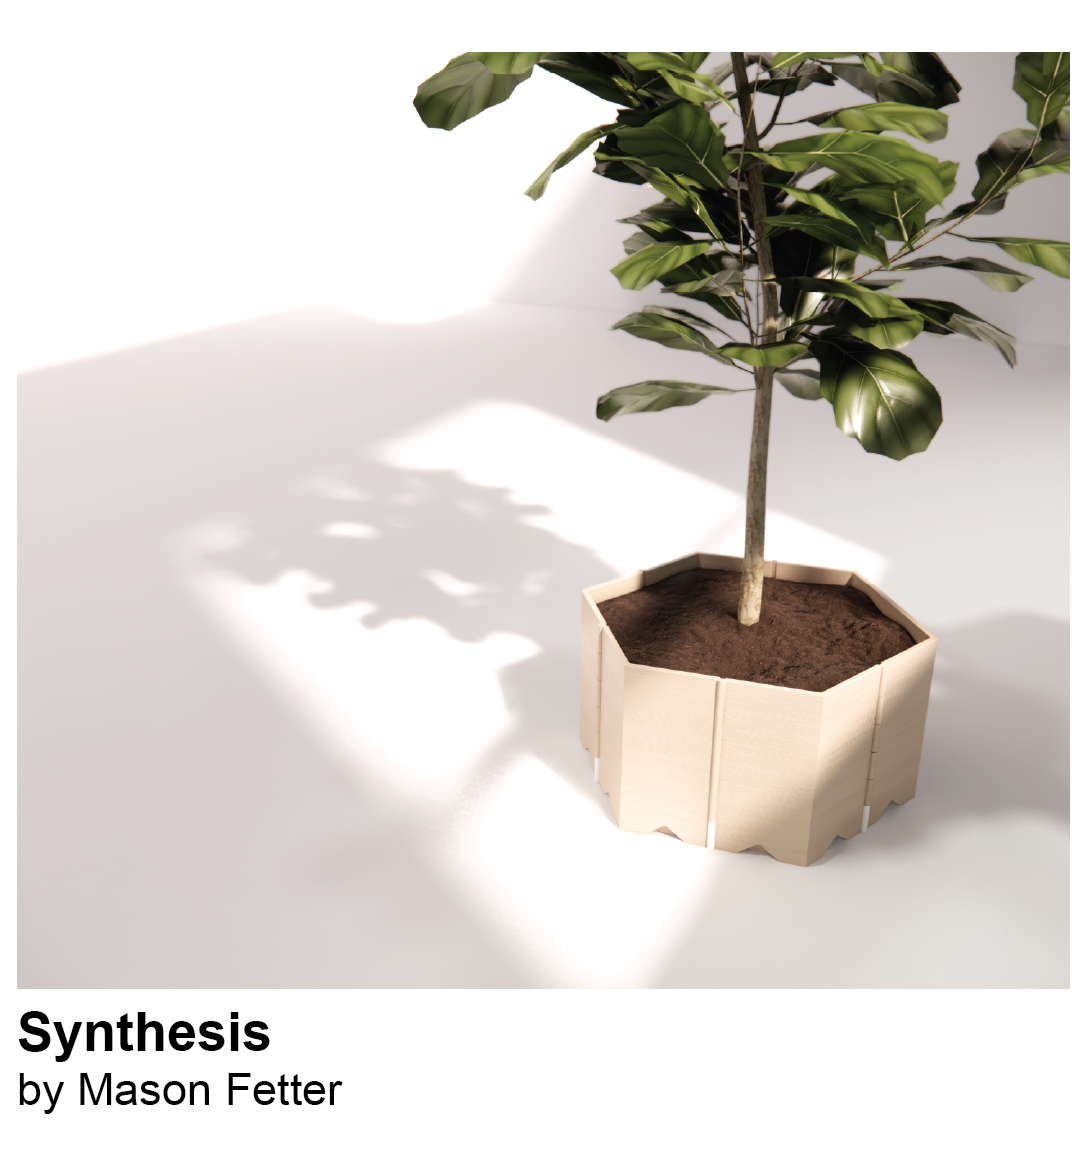 Synthesis Planter by Mason Fetter